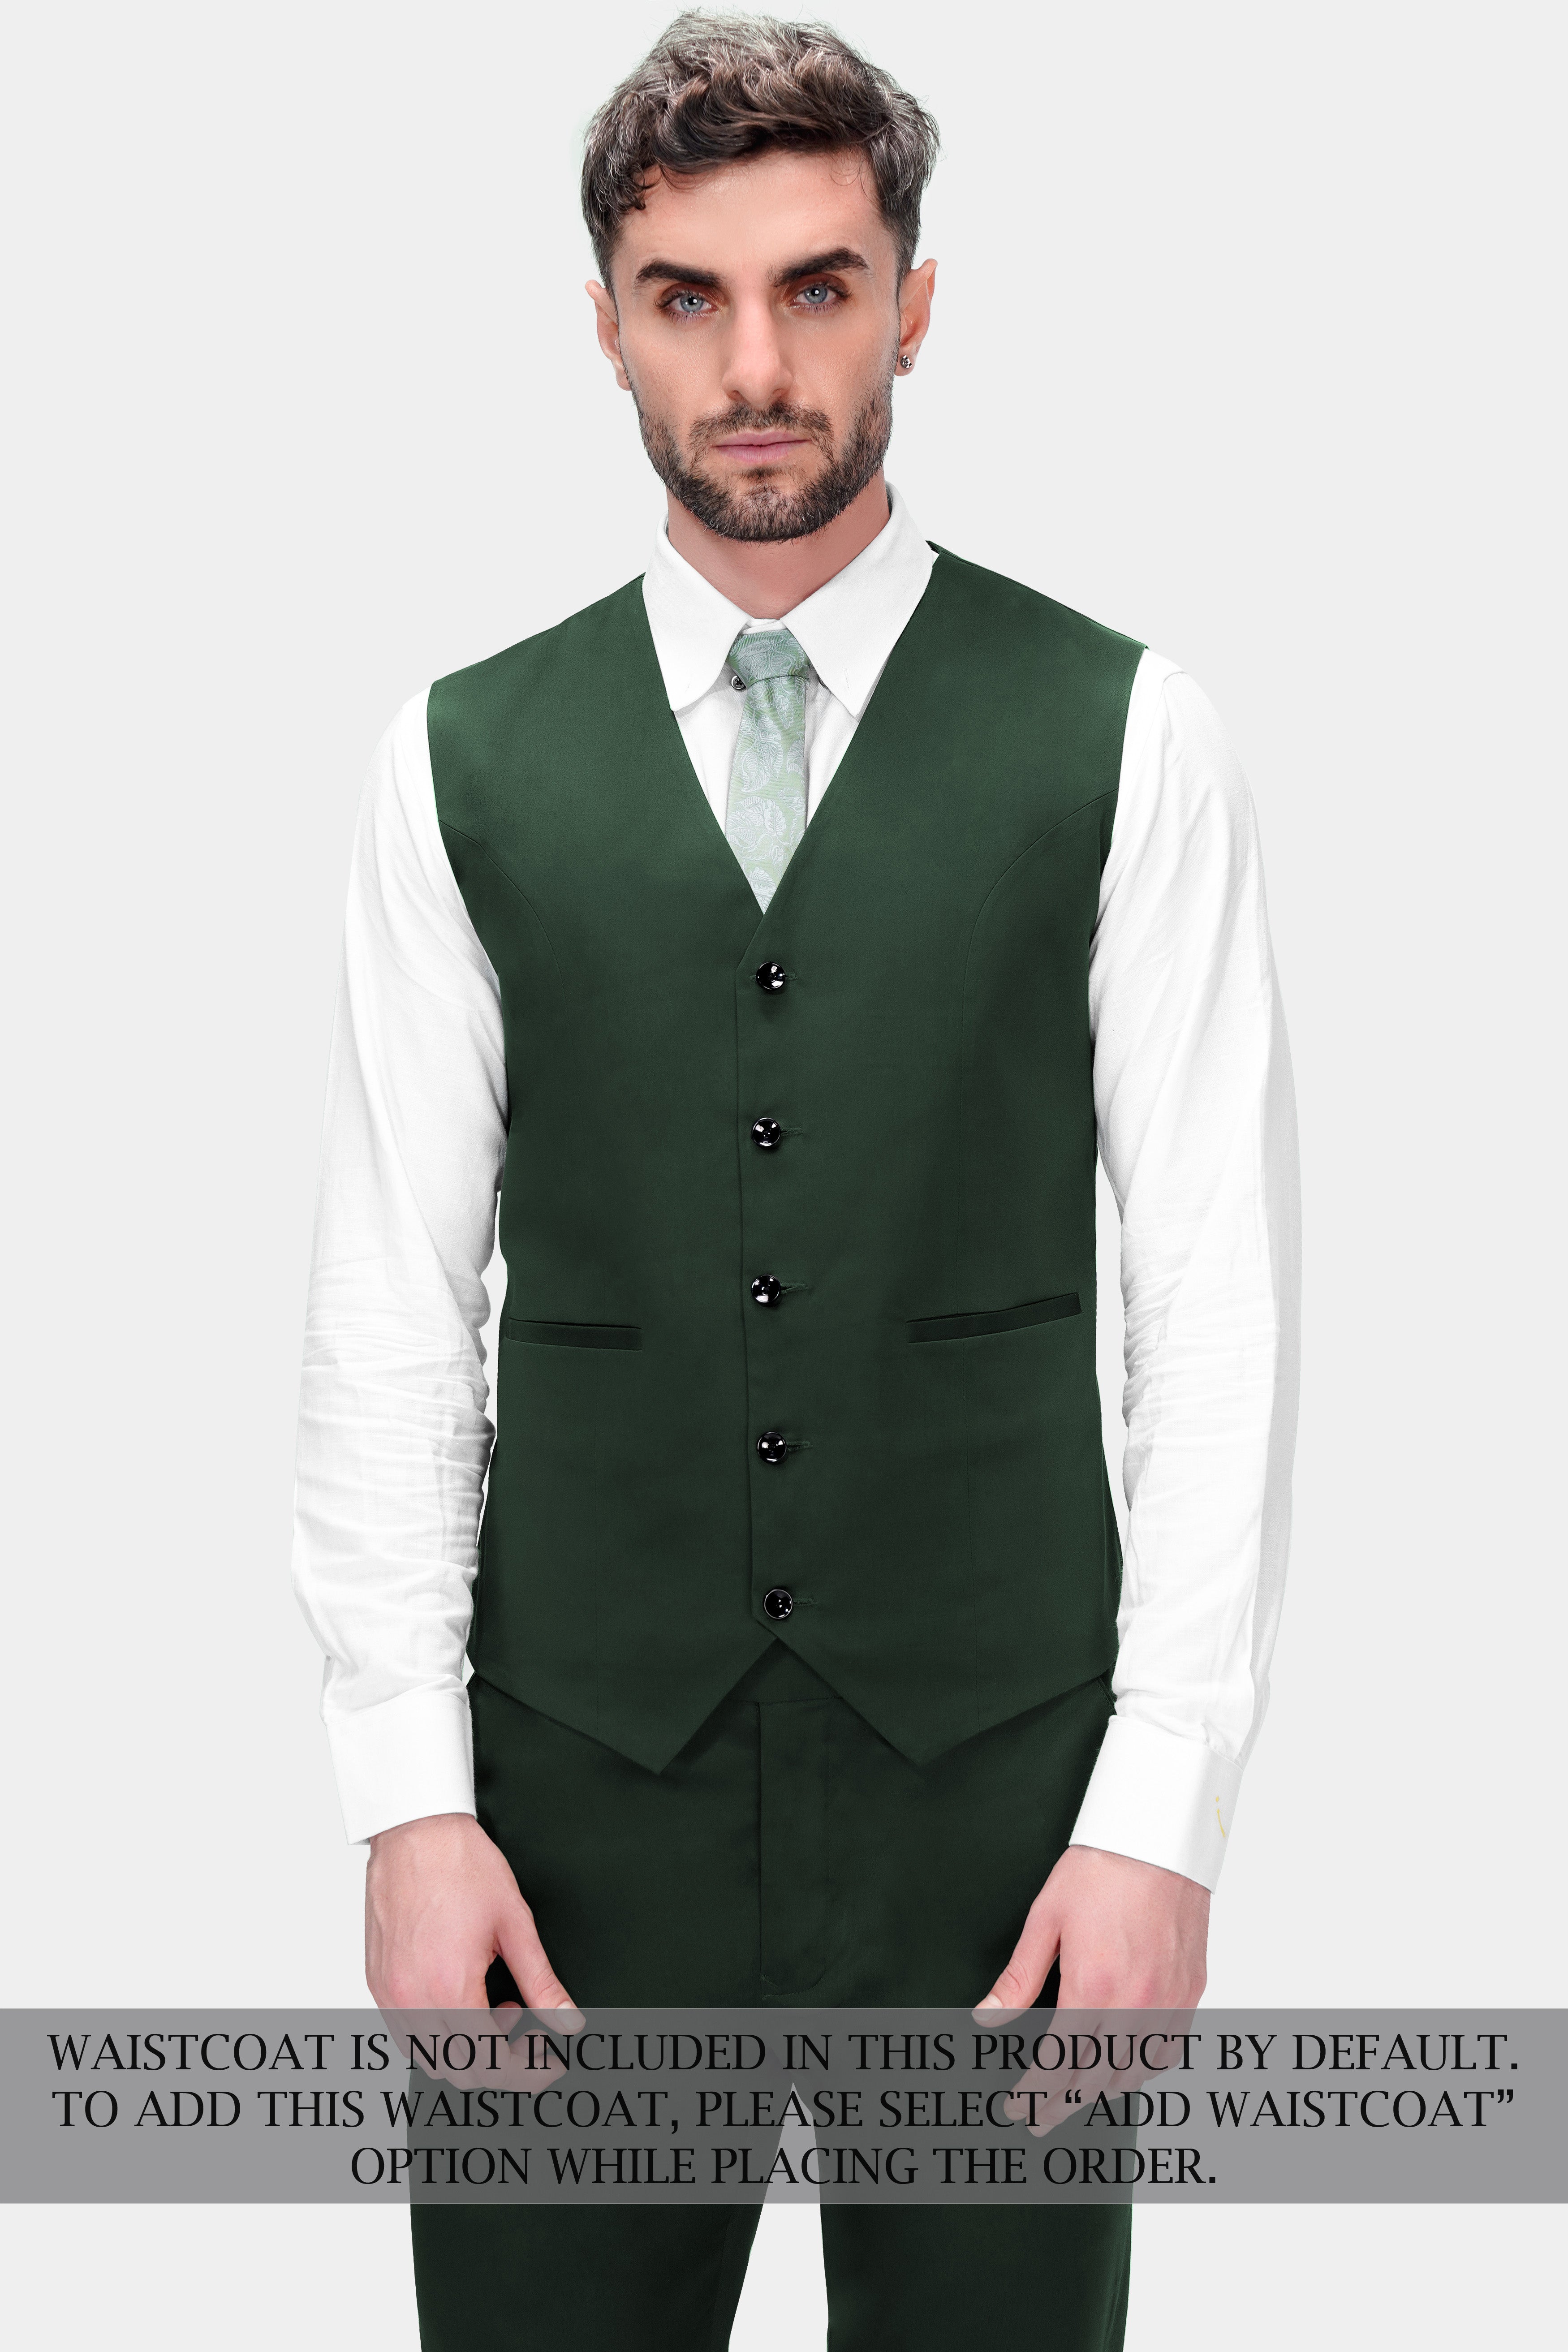 Heavy Metal Green Double Breasted Premium Cotton Stretchable Traveler Suit ST2773-DB-36,ST2773-DB-38,ST2773-DB-40,ST2773-DB-42,ST2773-DB-44,ST2773-DB-46,ST2773-DB-48,ST2773-DB-50,ST2773-DB-52,ST2773-DB-54,ST2773-DB-56,ST2773-DB-58,ST2773-DB-60